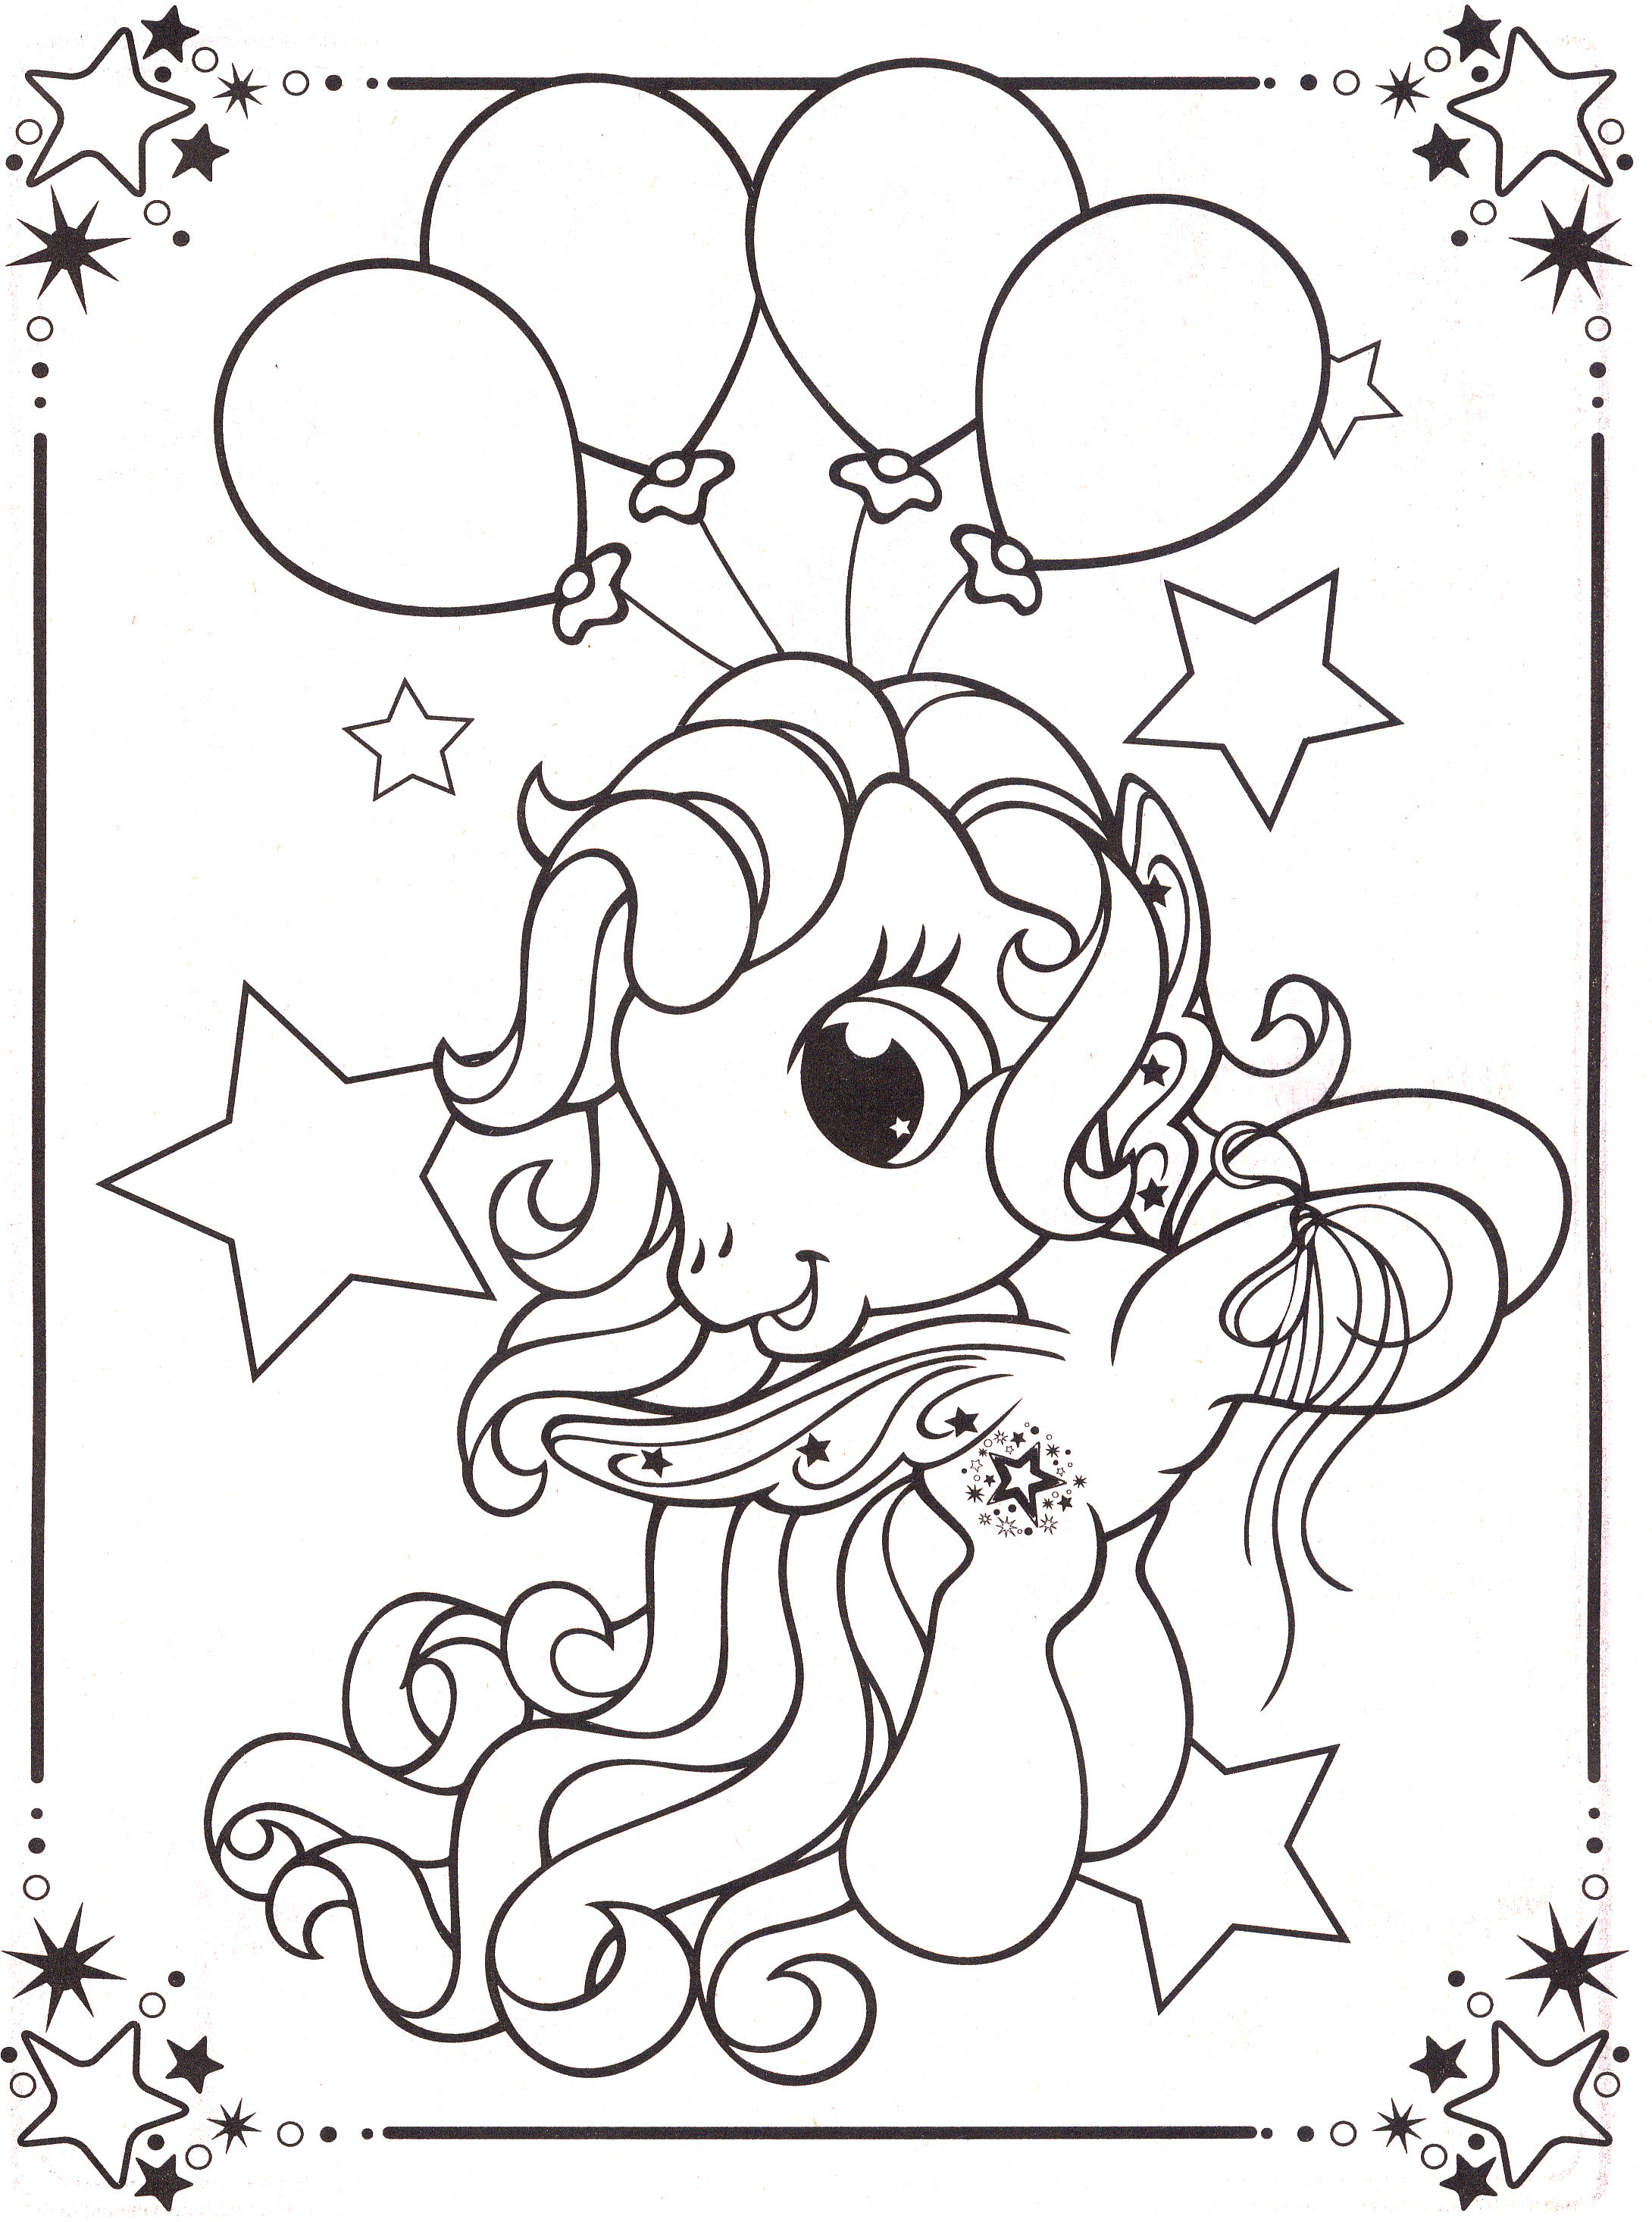 my-little-pony-coloring-pages-49 | Flickr - Photo Sharing!